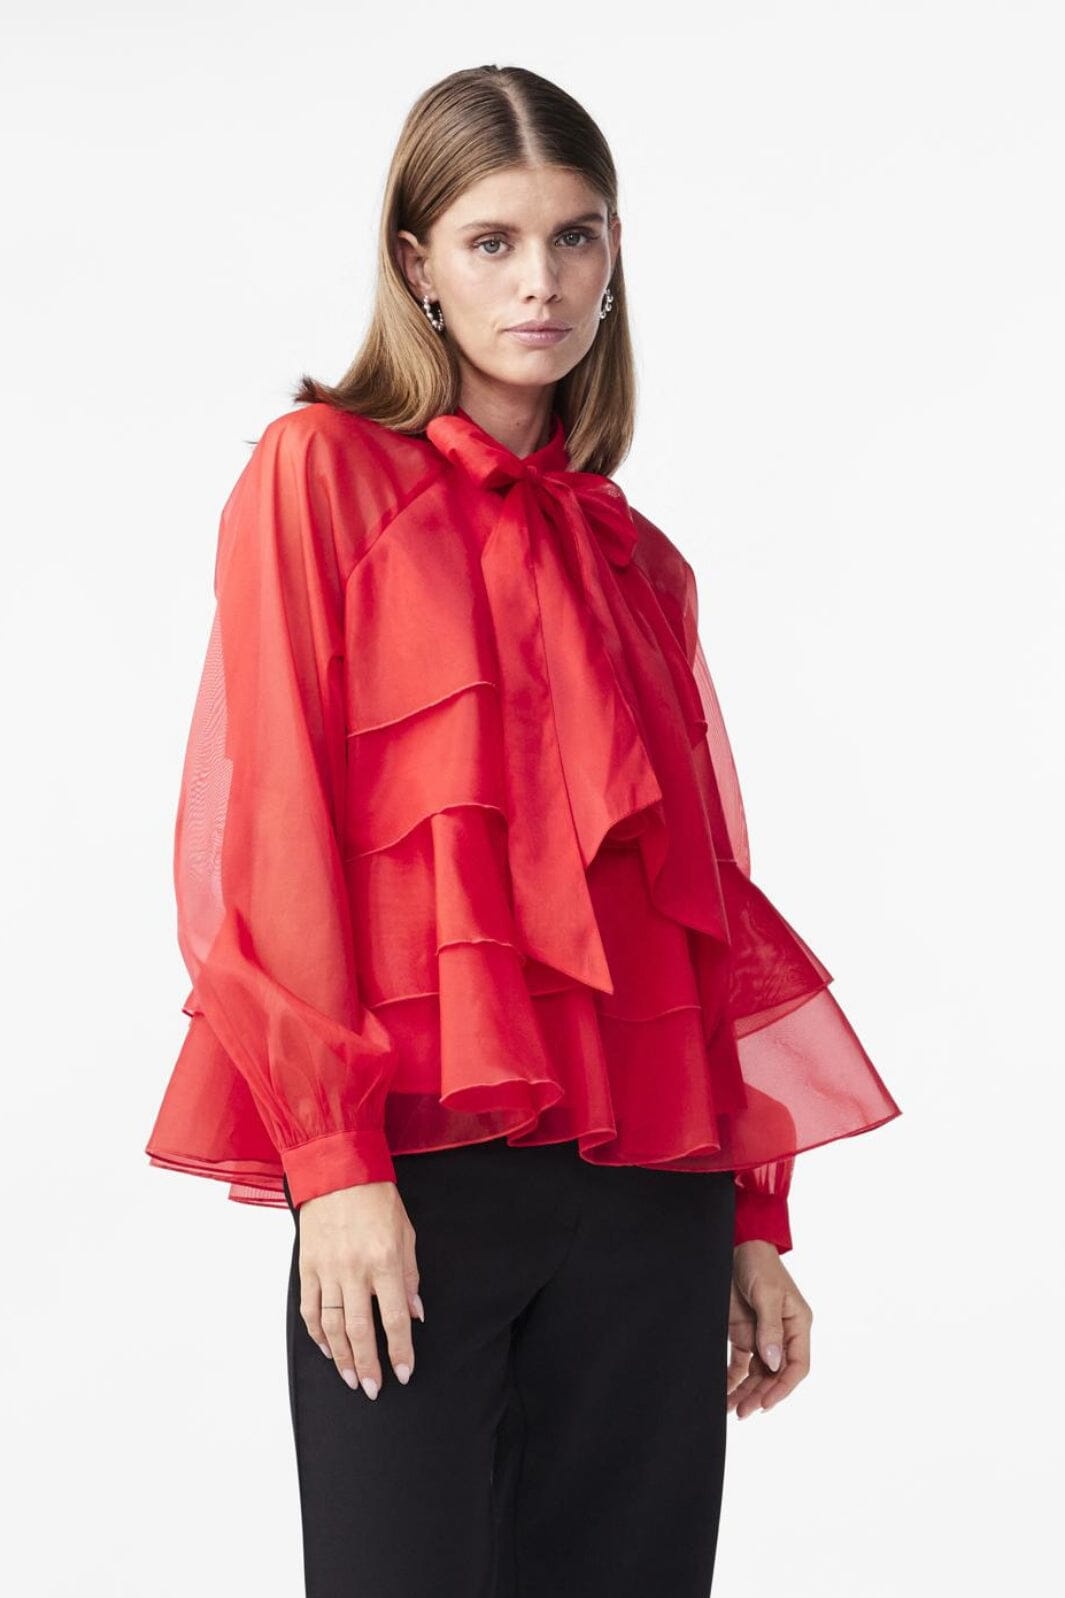 Y.A.S - Yaseloise Ls Top - 4562193 High Risk Red Bluser 